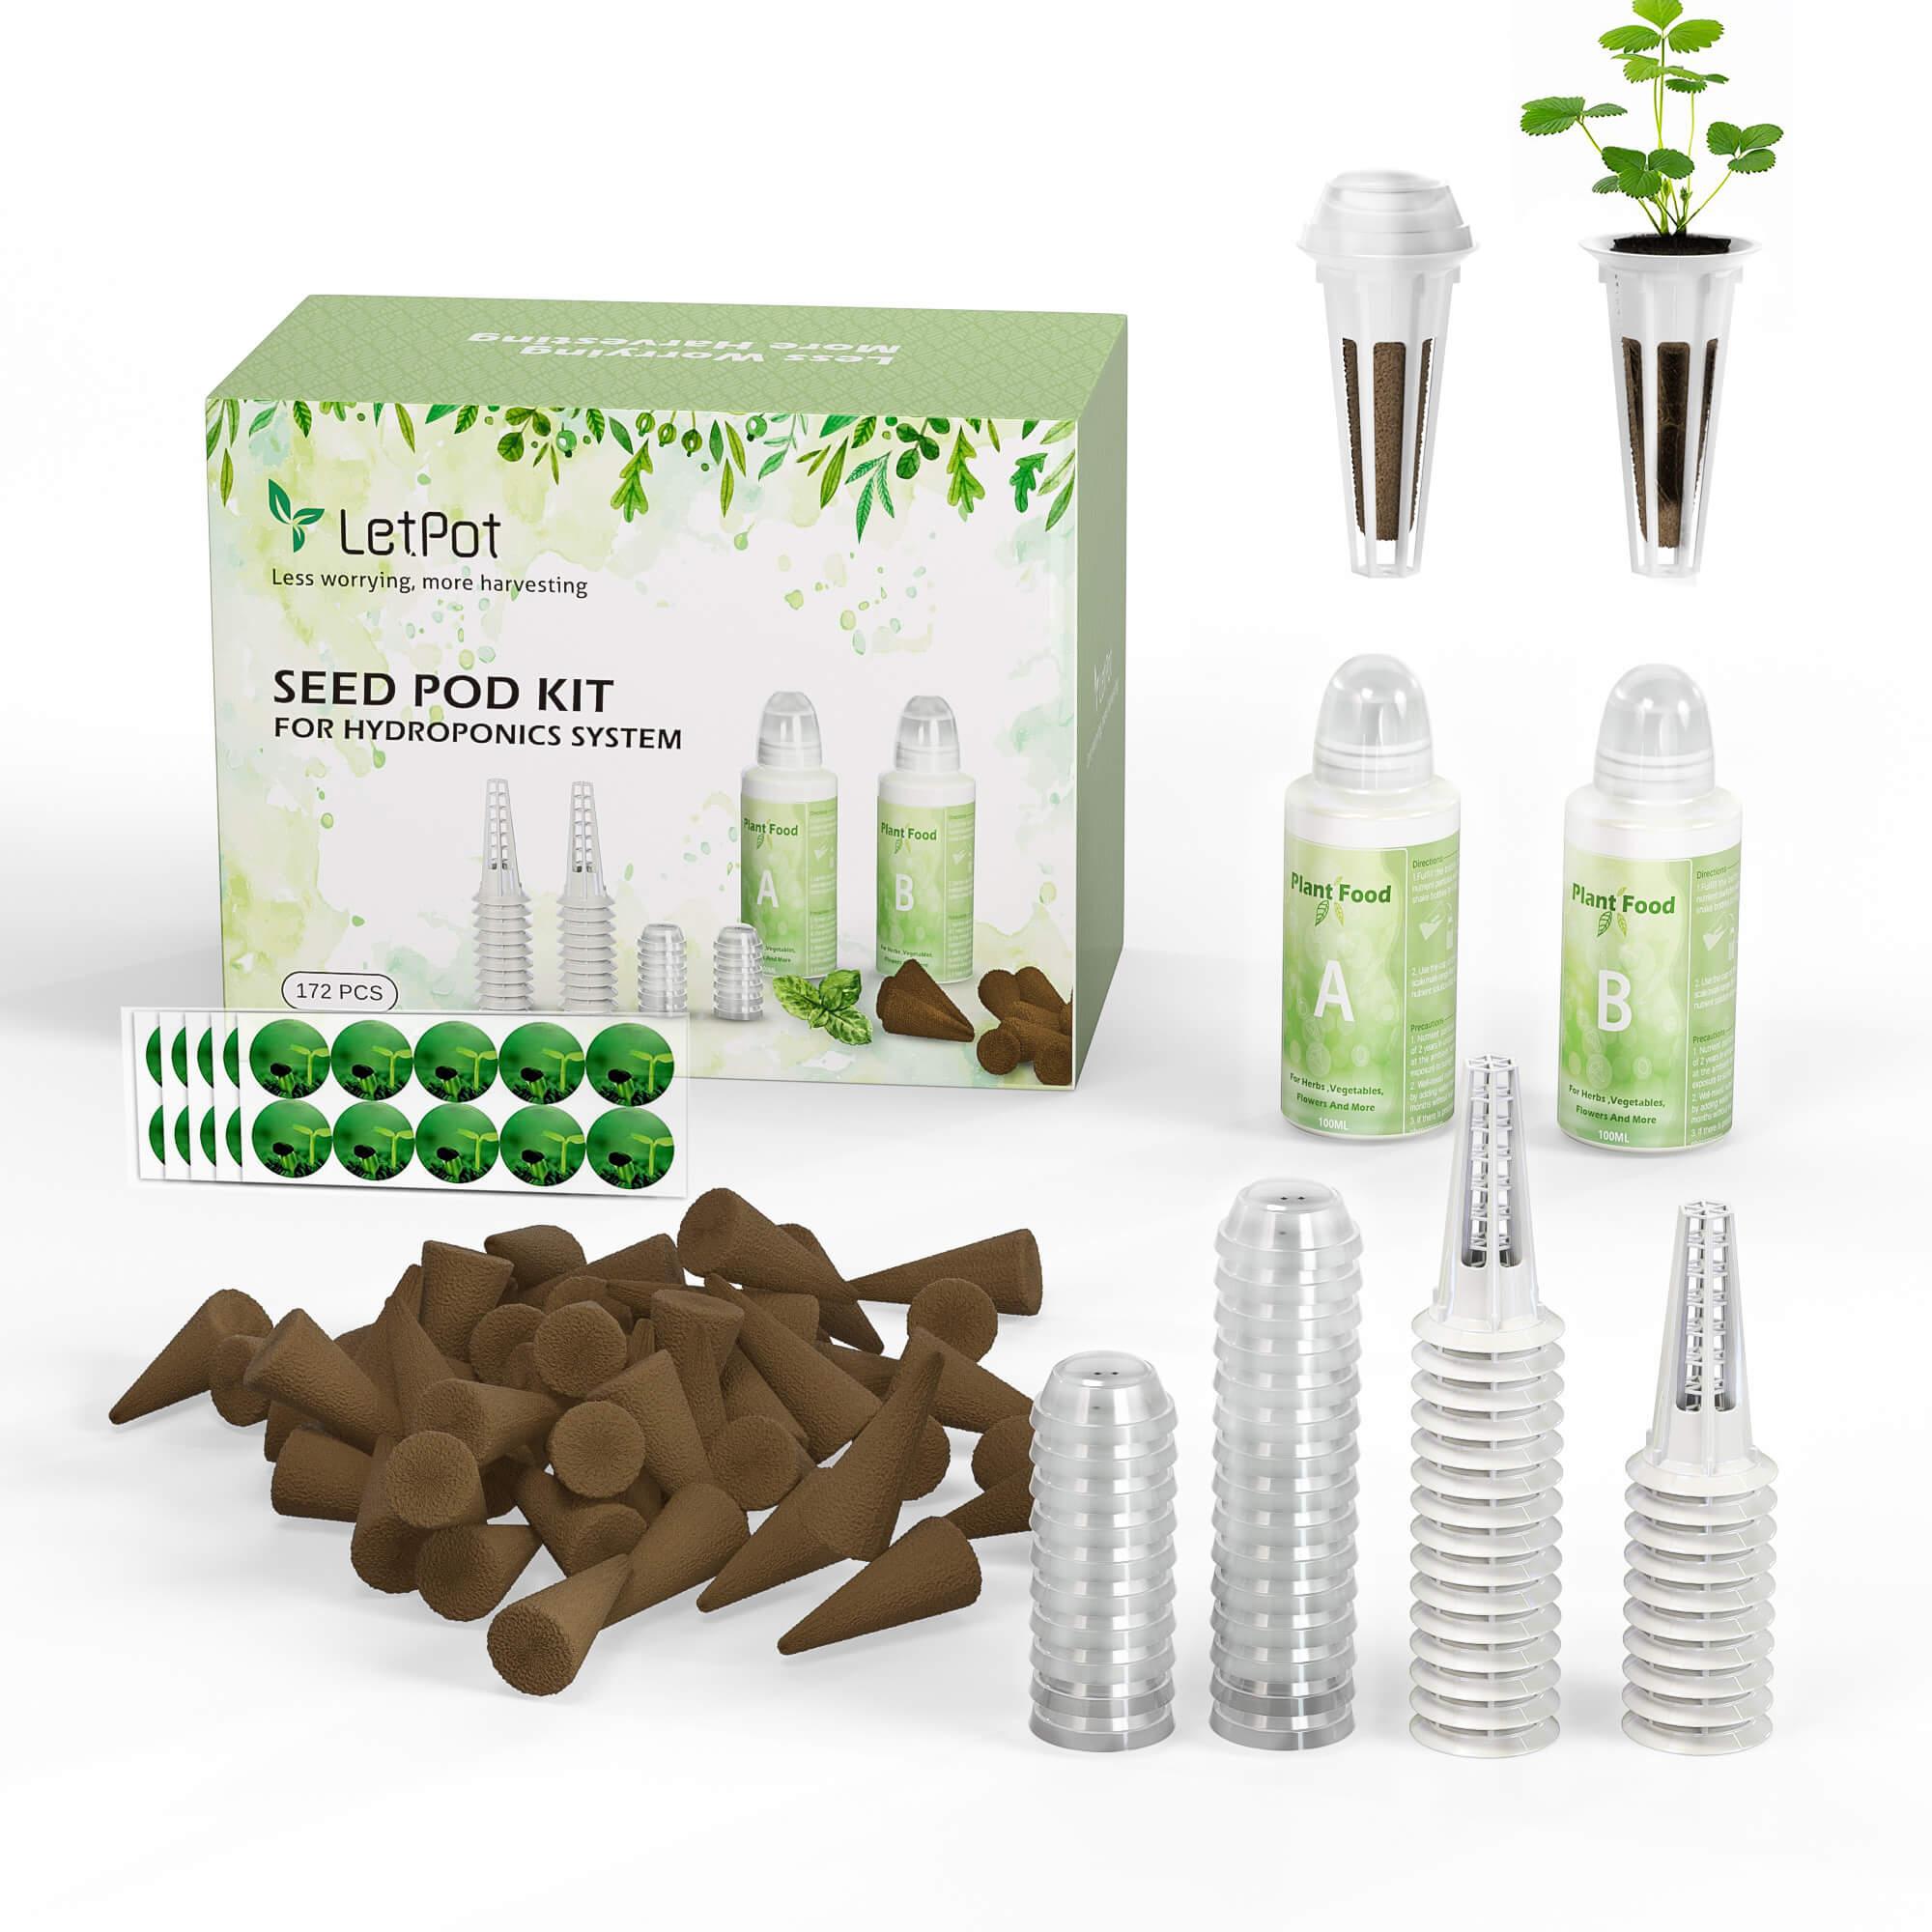 172Pcs-Hydroponics-Growing-System-Replacement-Seed-Pod-Kits-LetPot's-garden